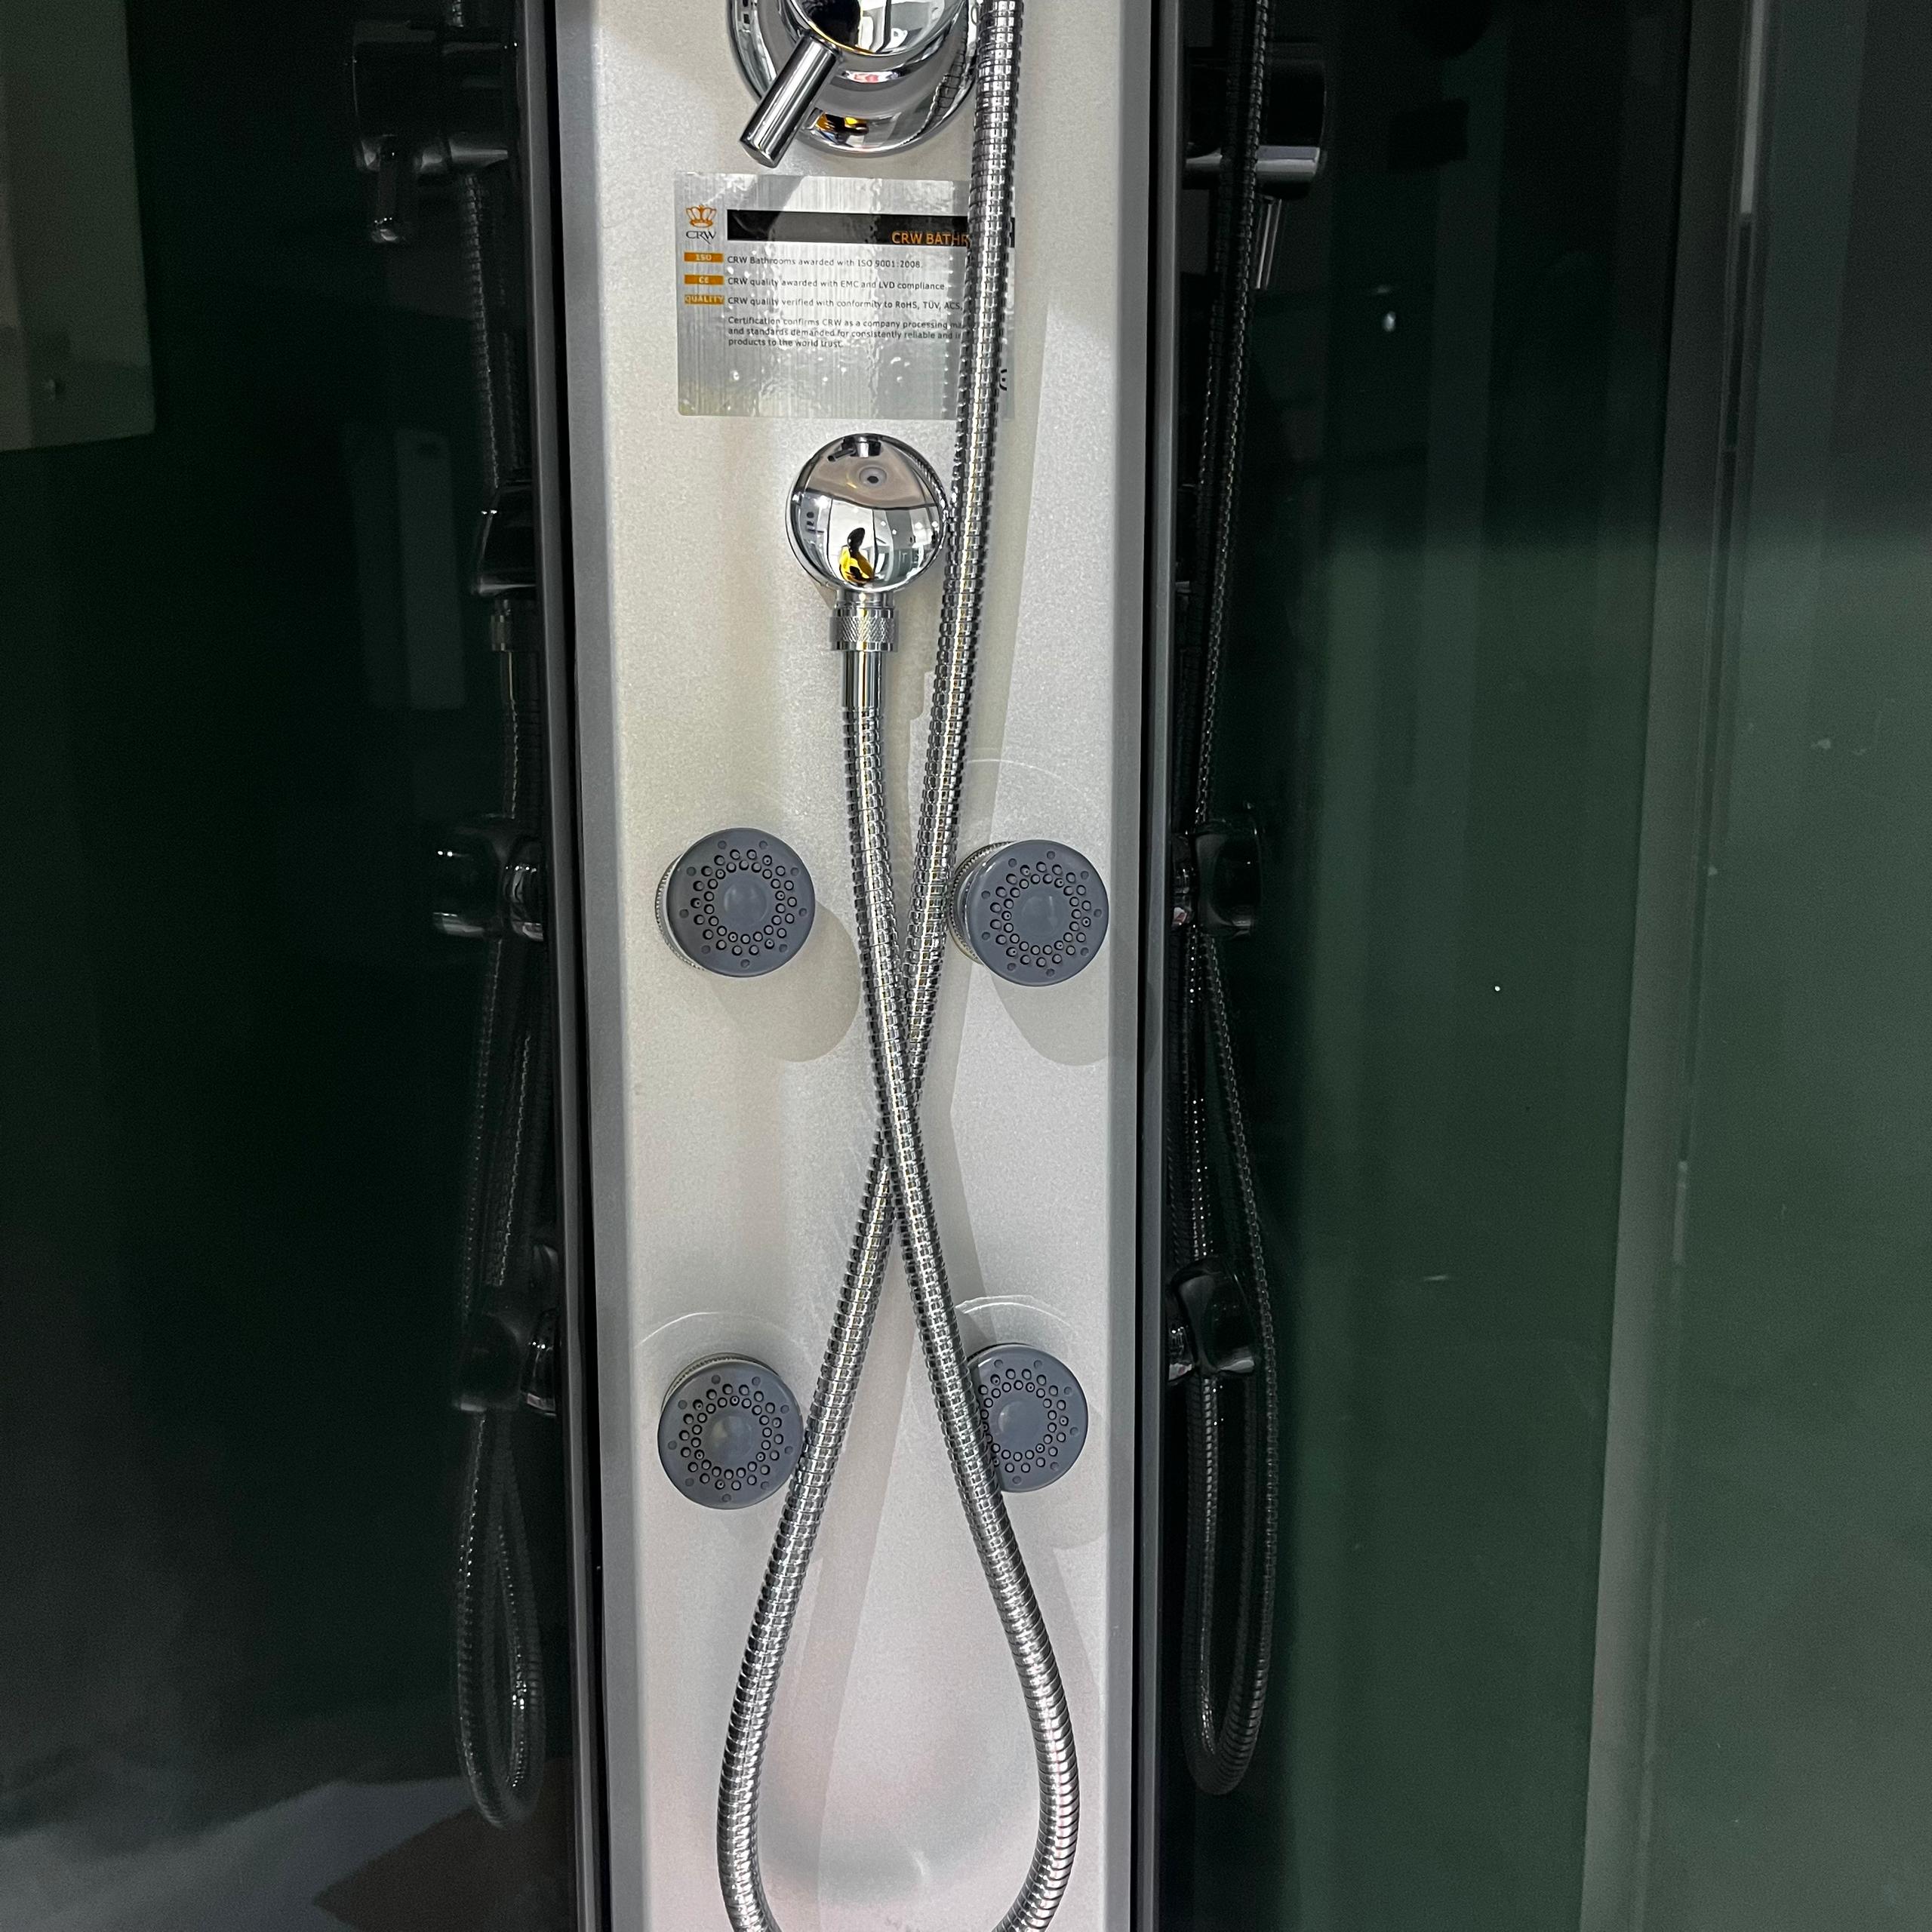 CRW Hydro Shower Enclosure F126 - Premium Steam & Hydro Showers from CRW - Just GHS20350! Shop now at Kimo in Ghana